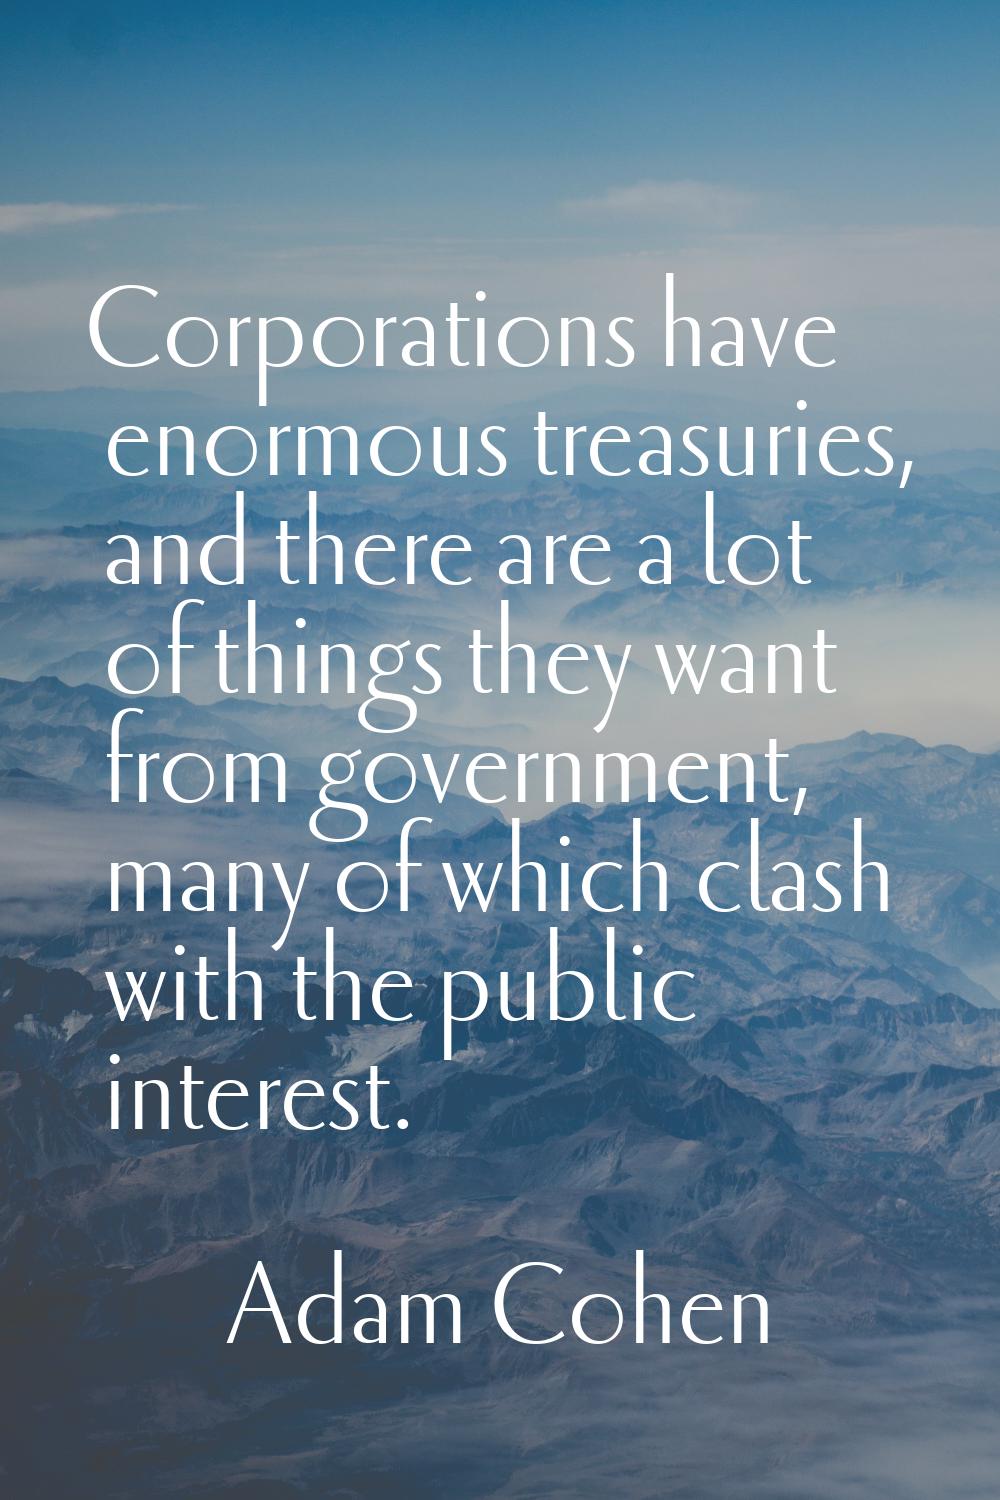 Corporations have enormous treasuries, and there are a lot of things they want from government, man